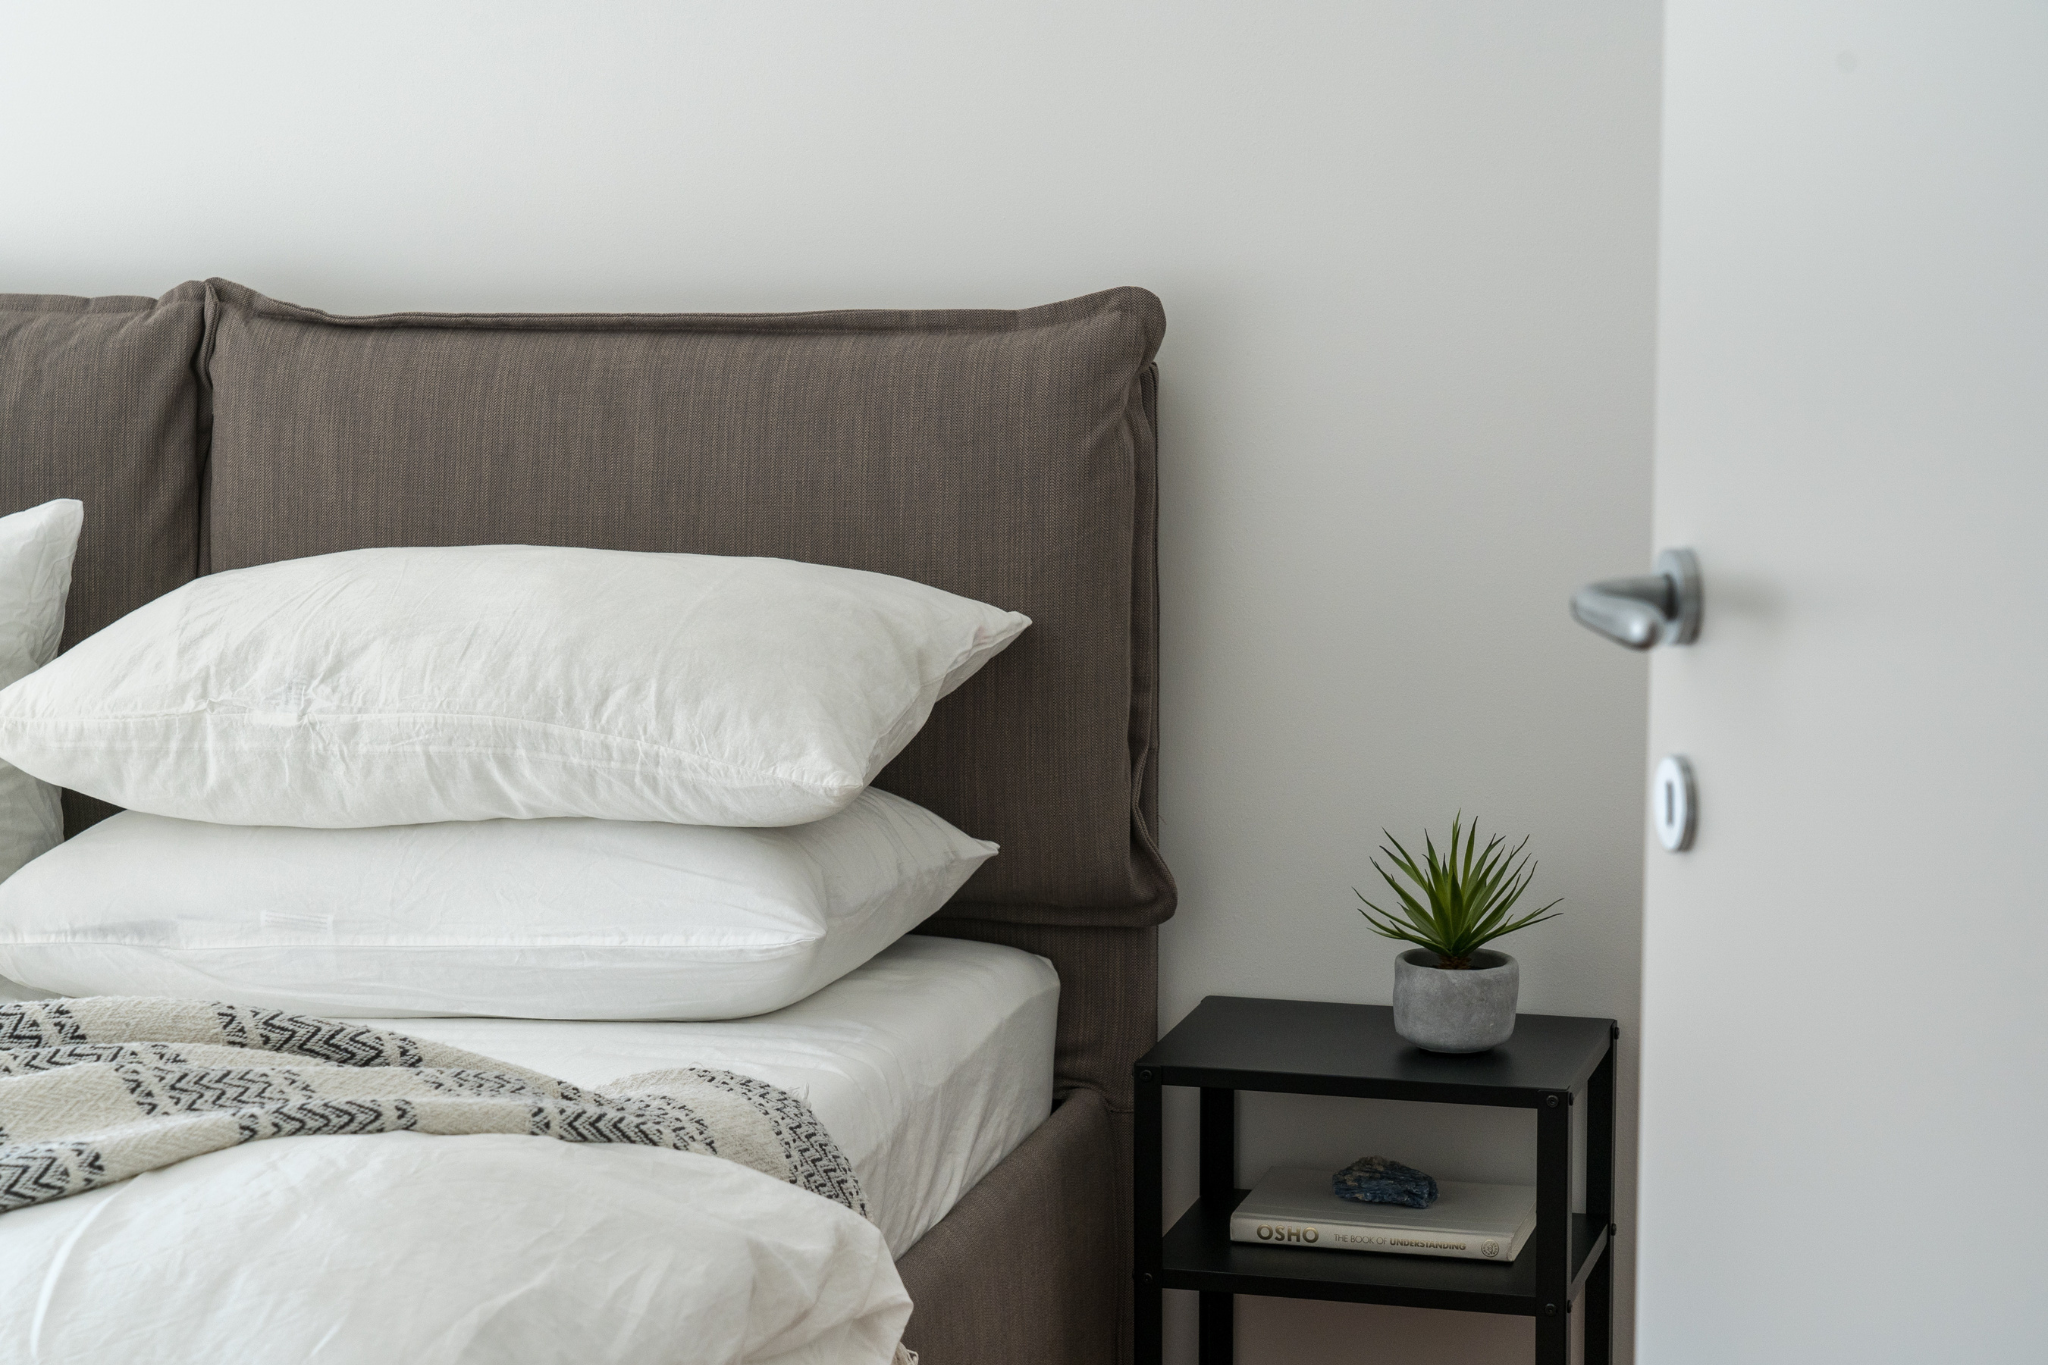 Part 1 of 3: How to choose the right pillow for better sleep - Different types of pillows and their benefits for back and neck health